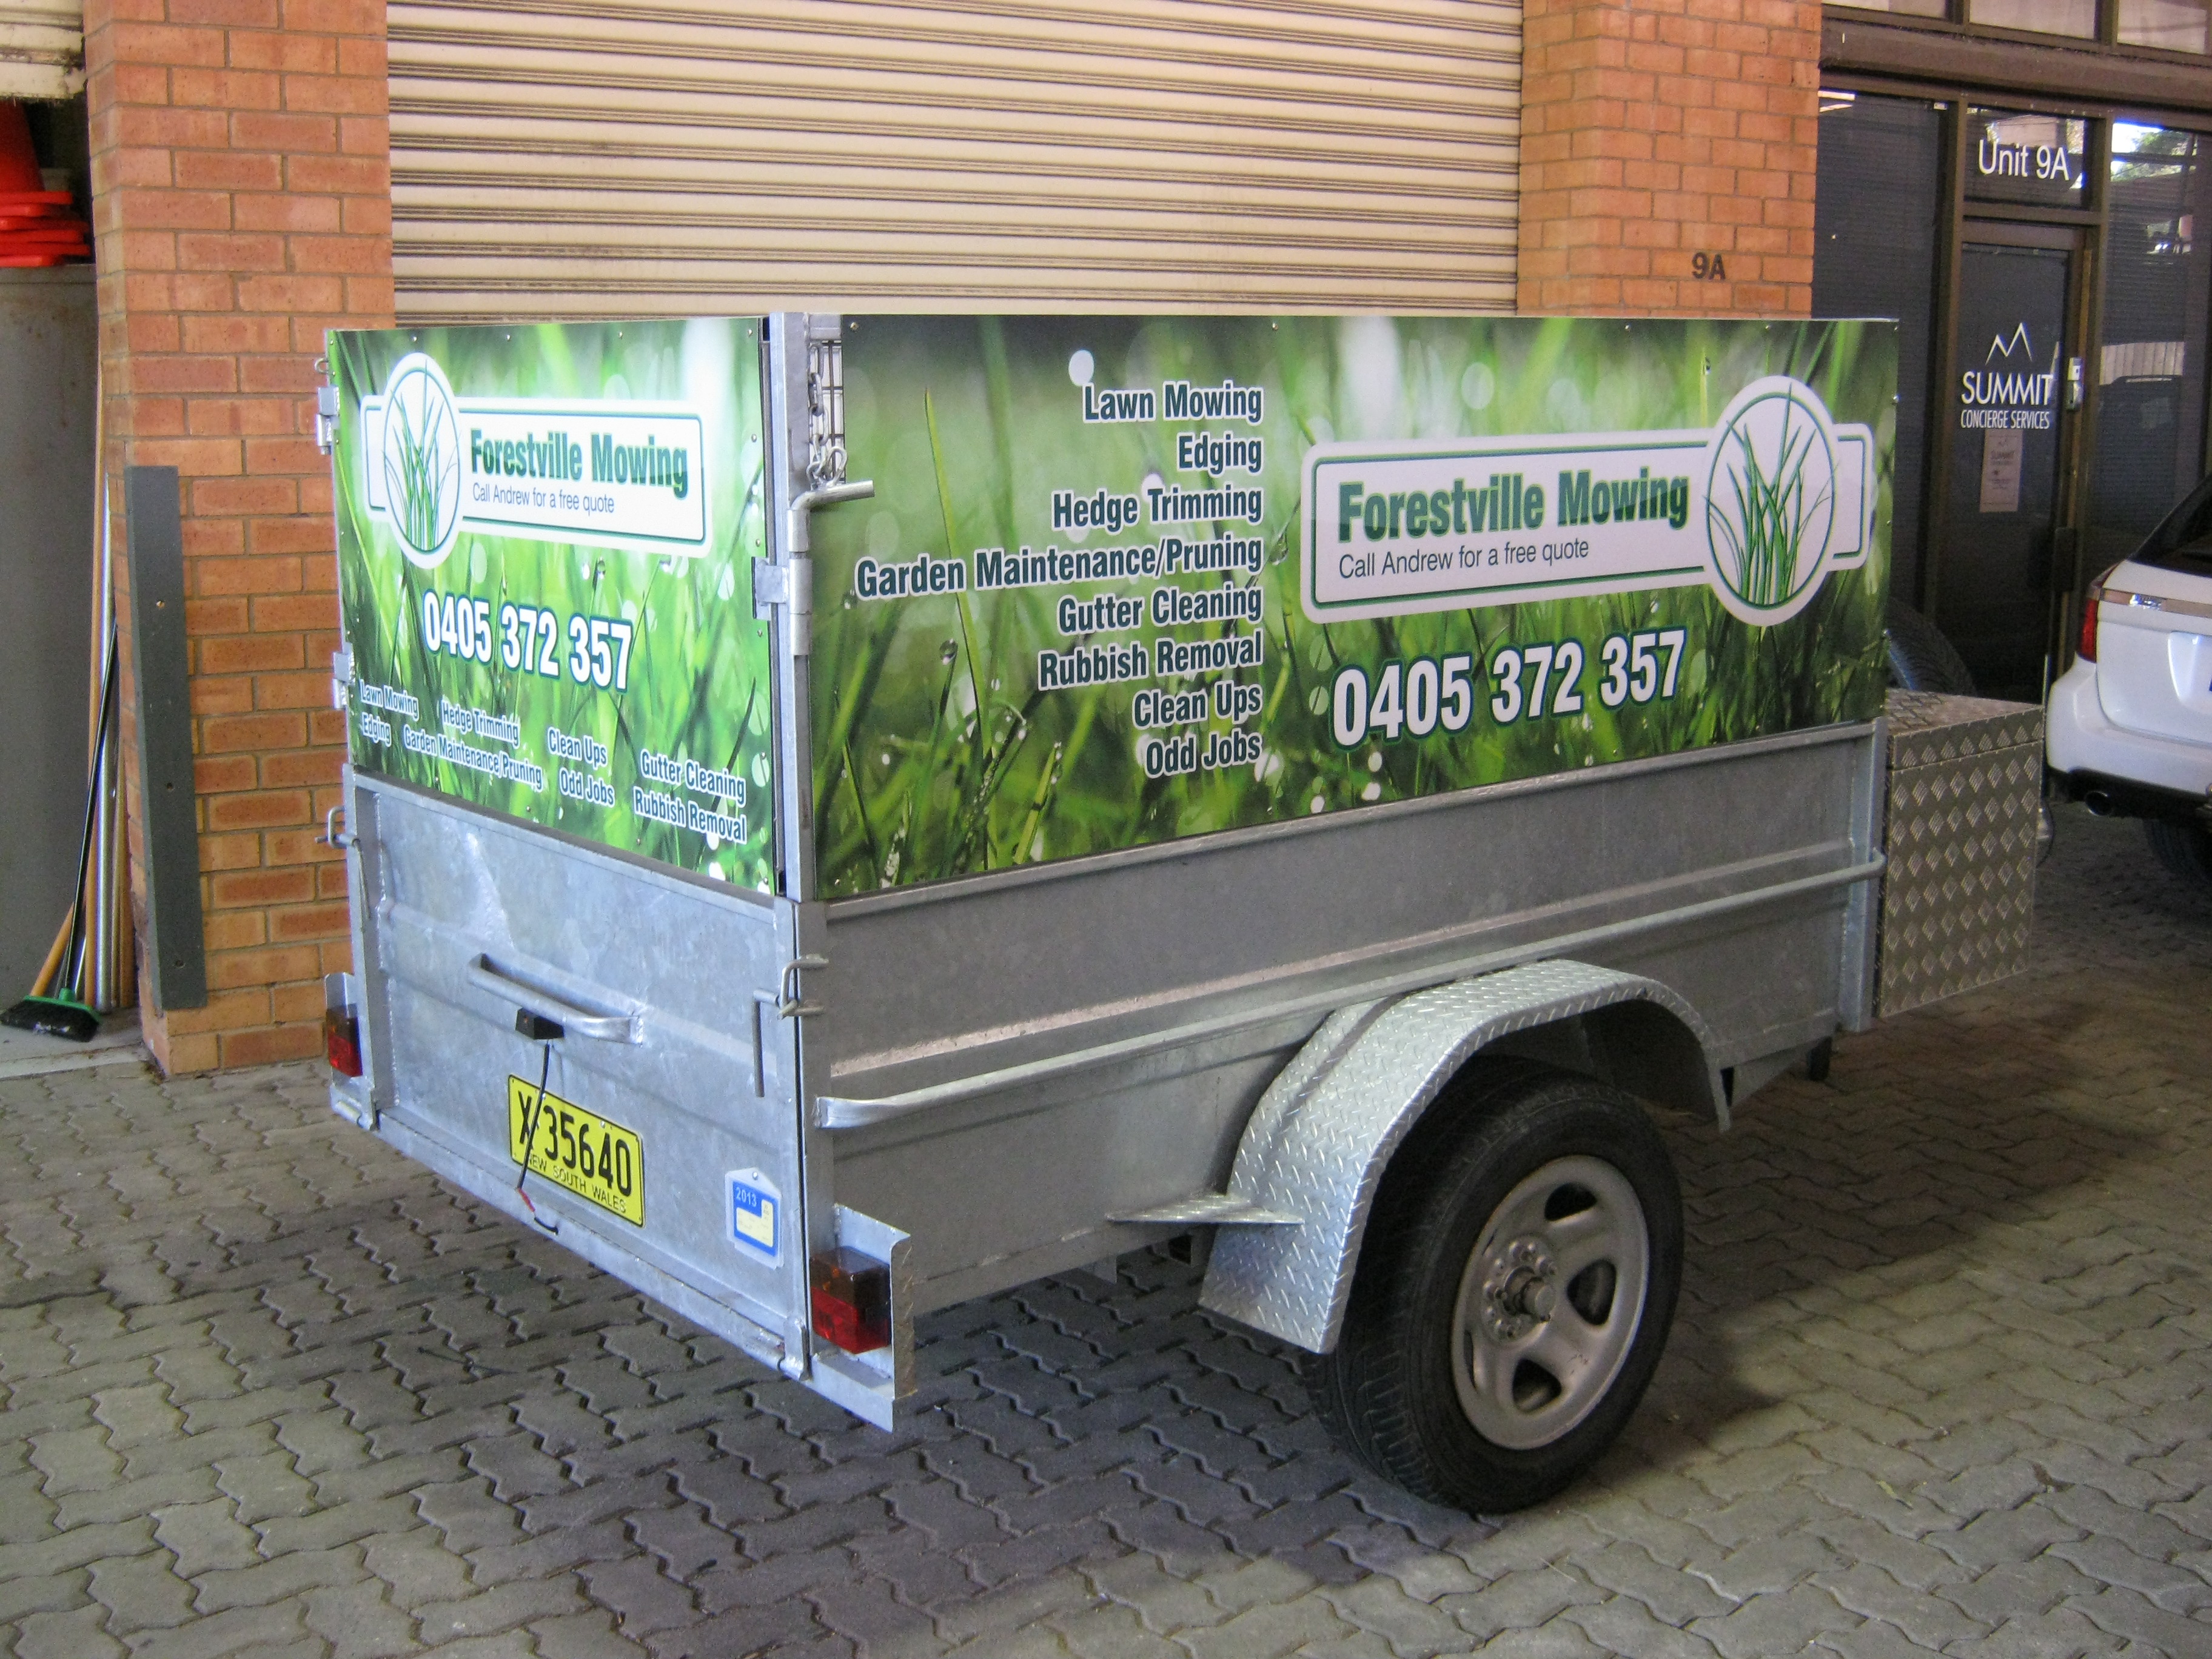 Jmac Graphics, Signage, Outdoor, Wrapping Car, Wrapping Trailer, ForestvilMowing